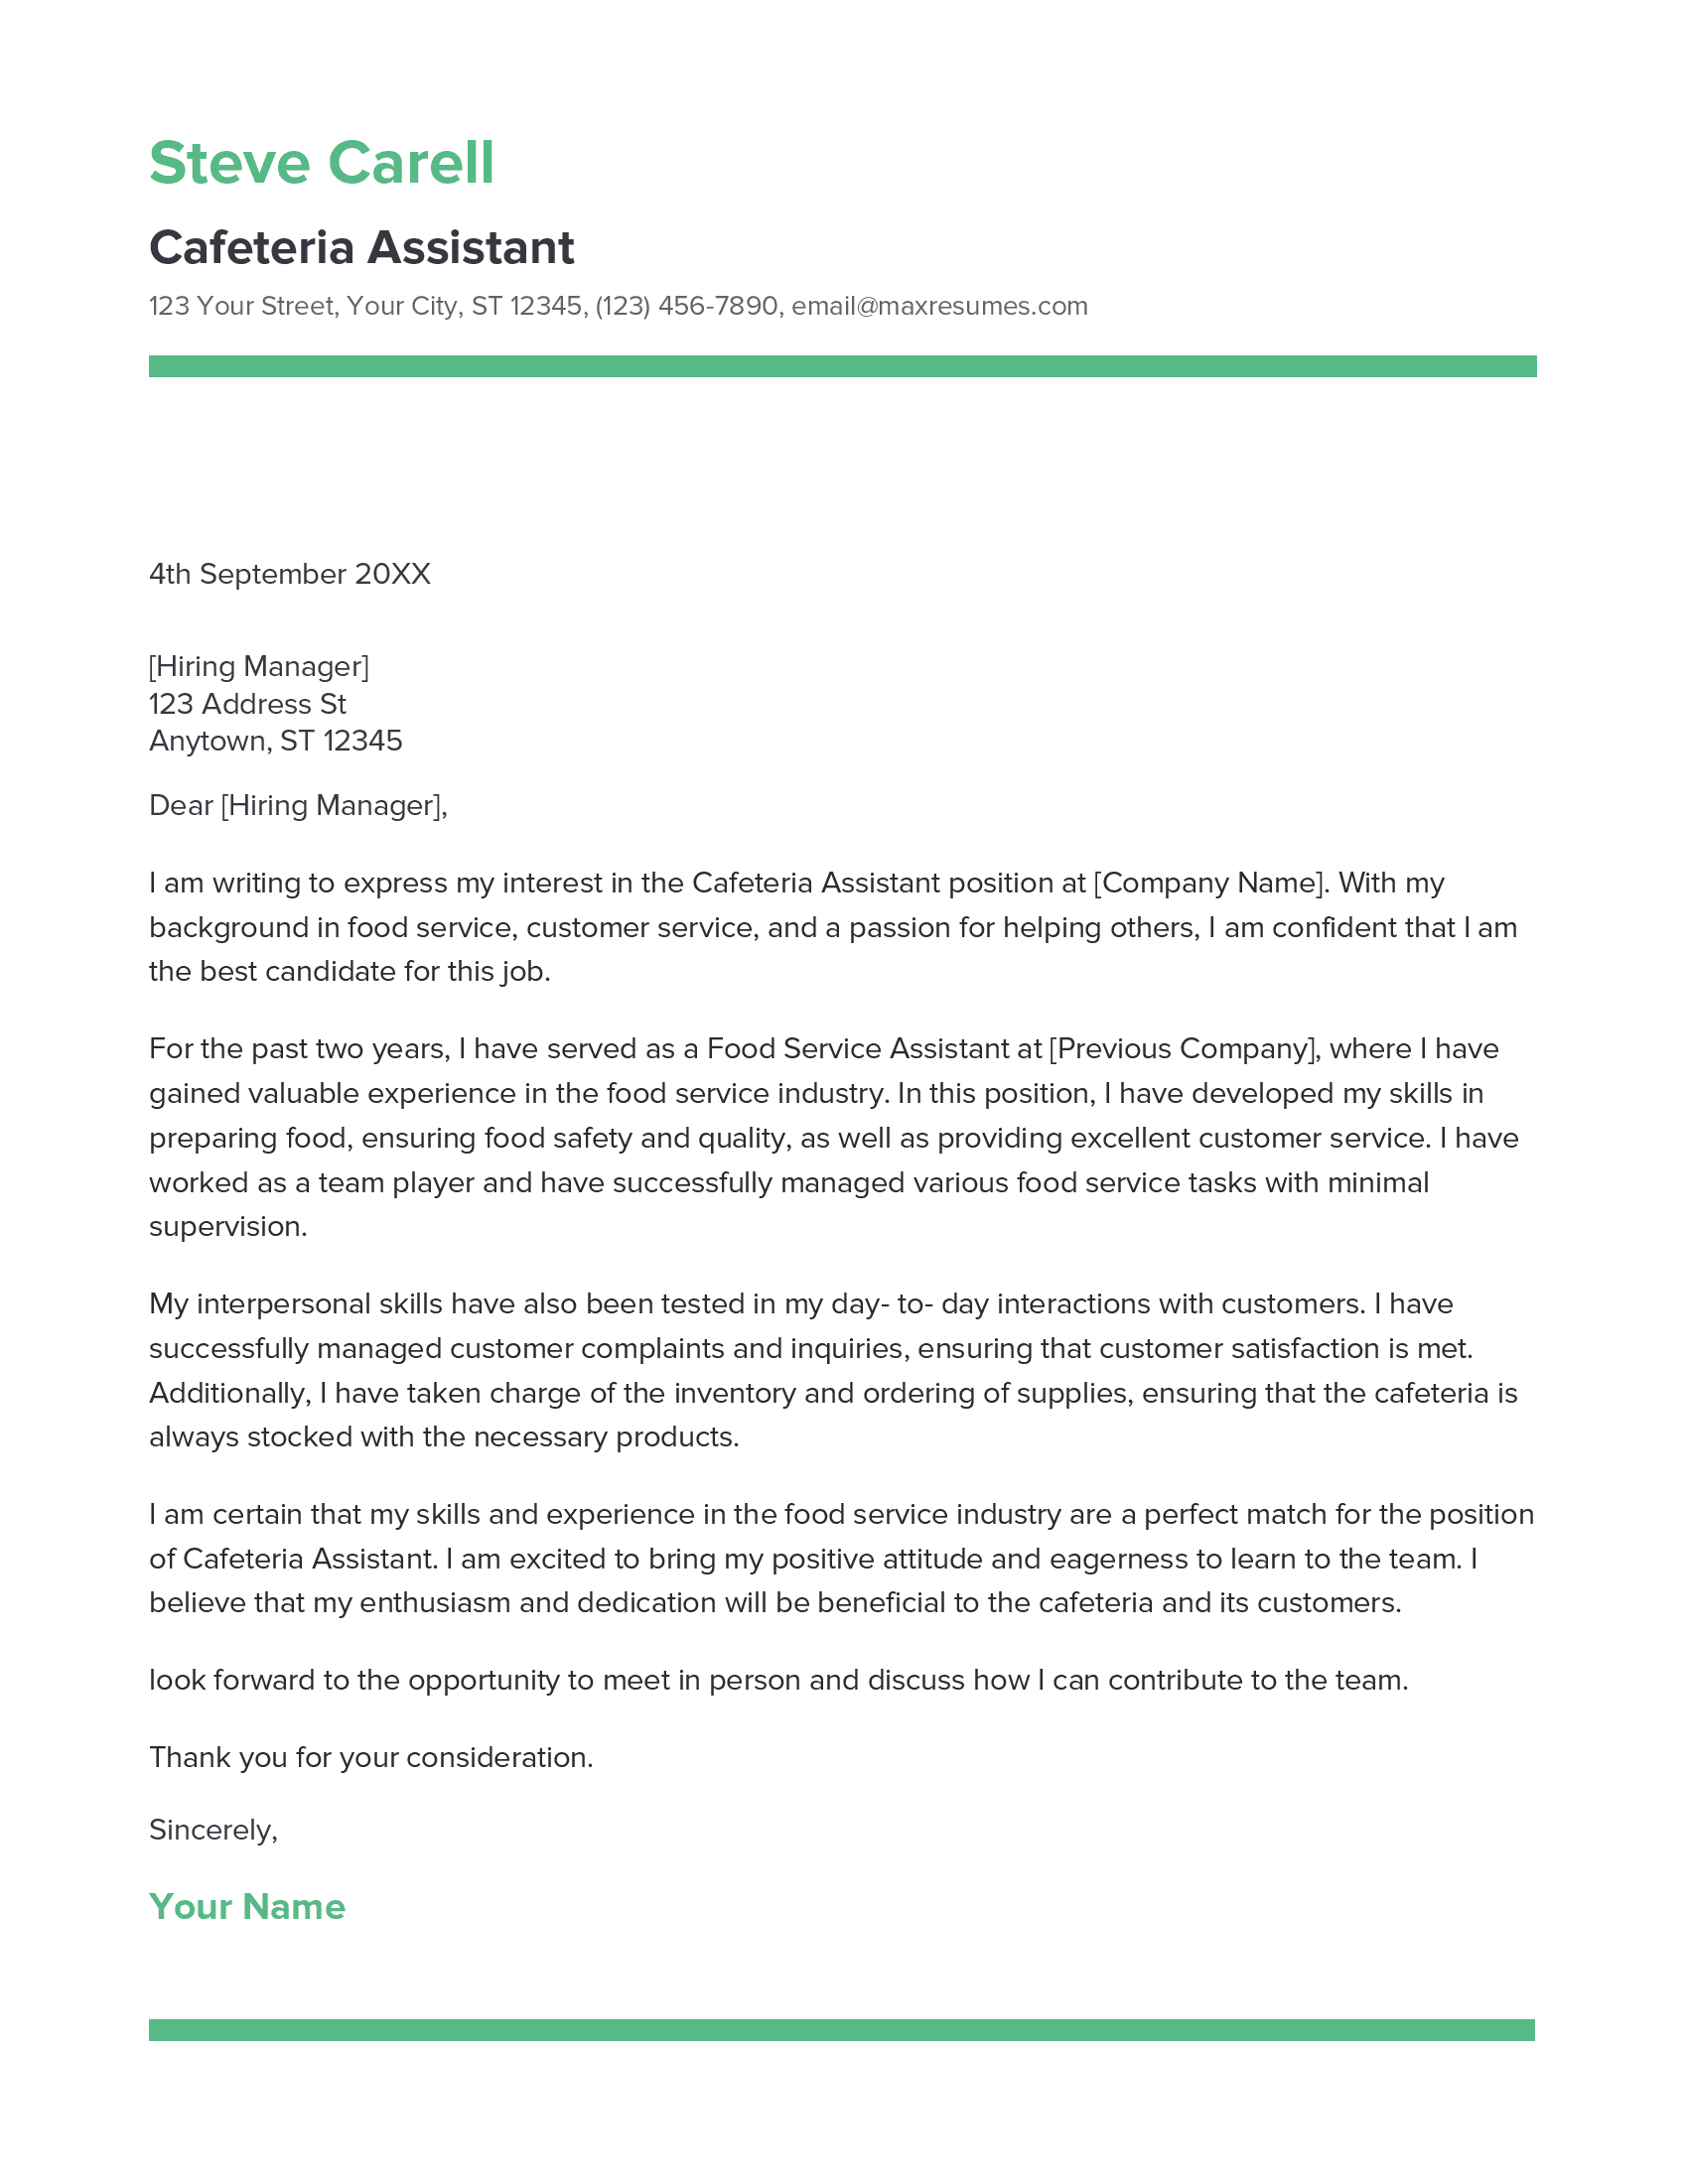 Cafeteria Assistant Cover Letter Example